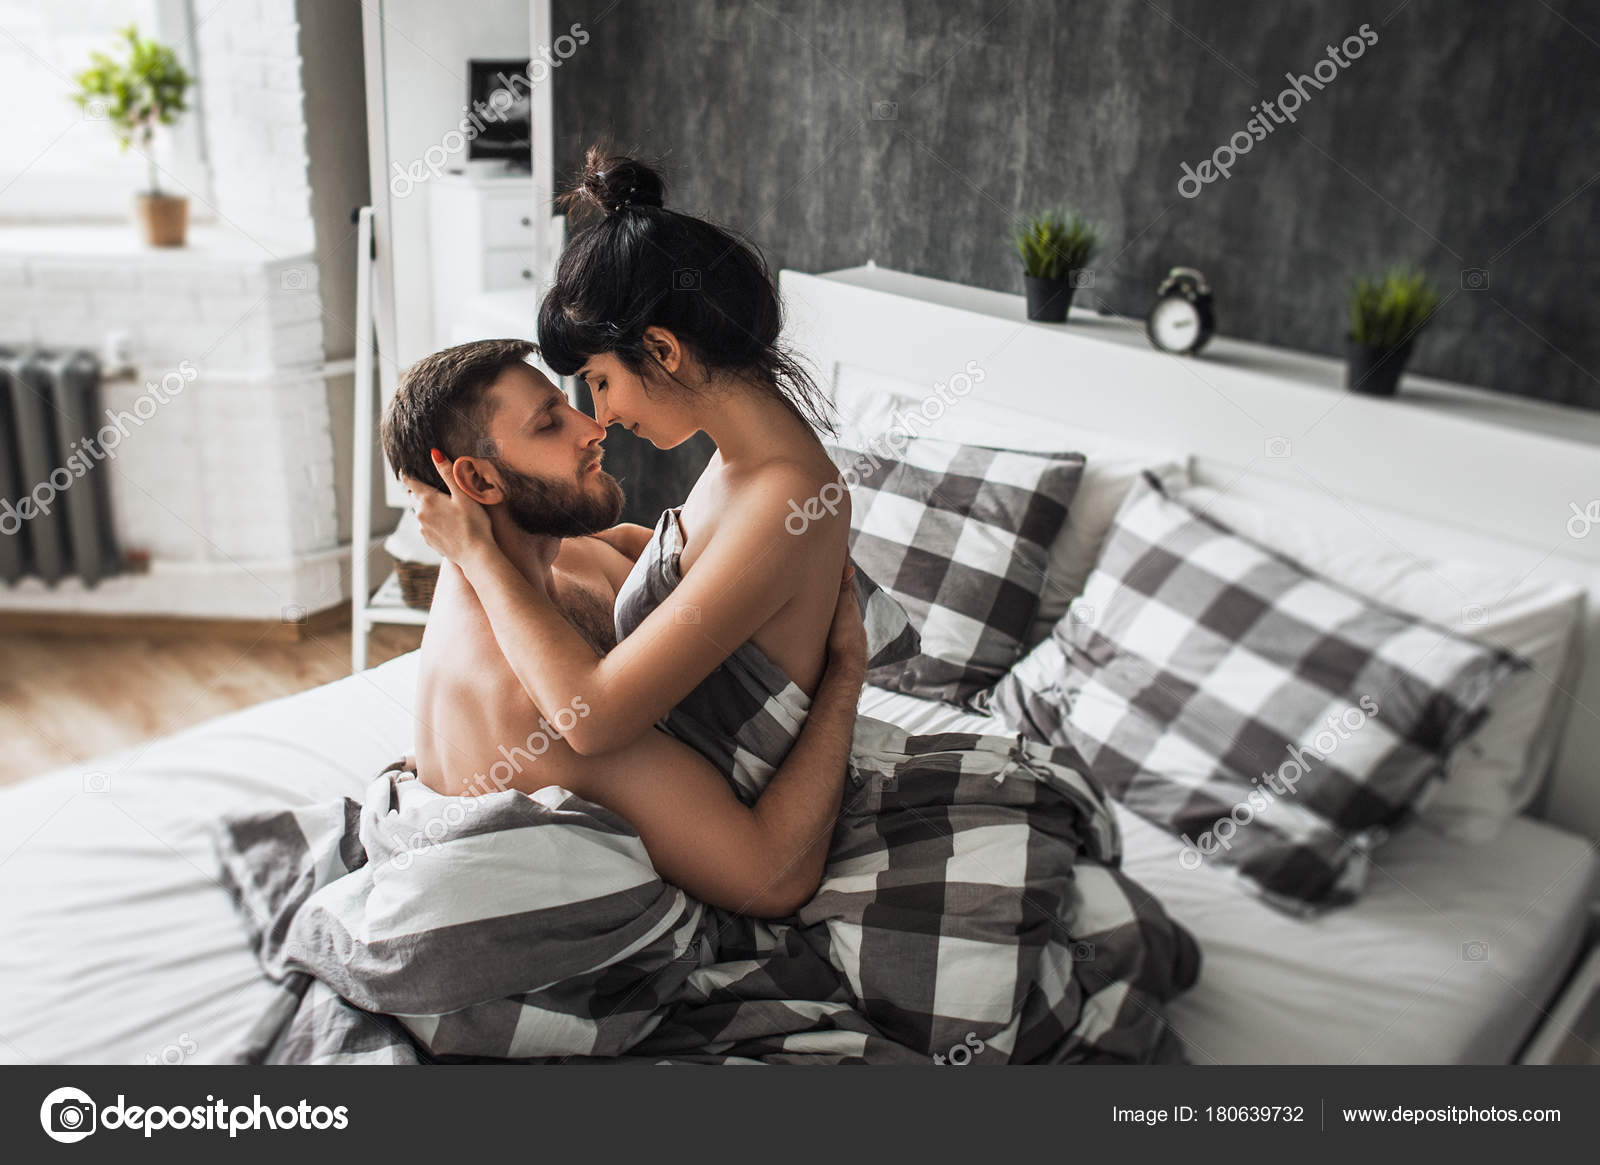 Man Woman Making Love Bed Loving Couple Bed Having Sex Stock Photo by ©sotnikov_mikhail@mail.ru 180639732 image